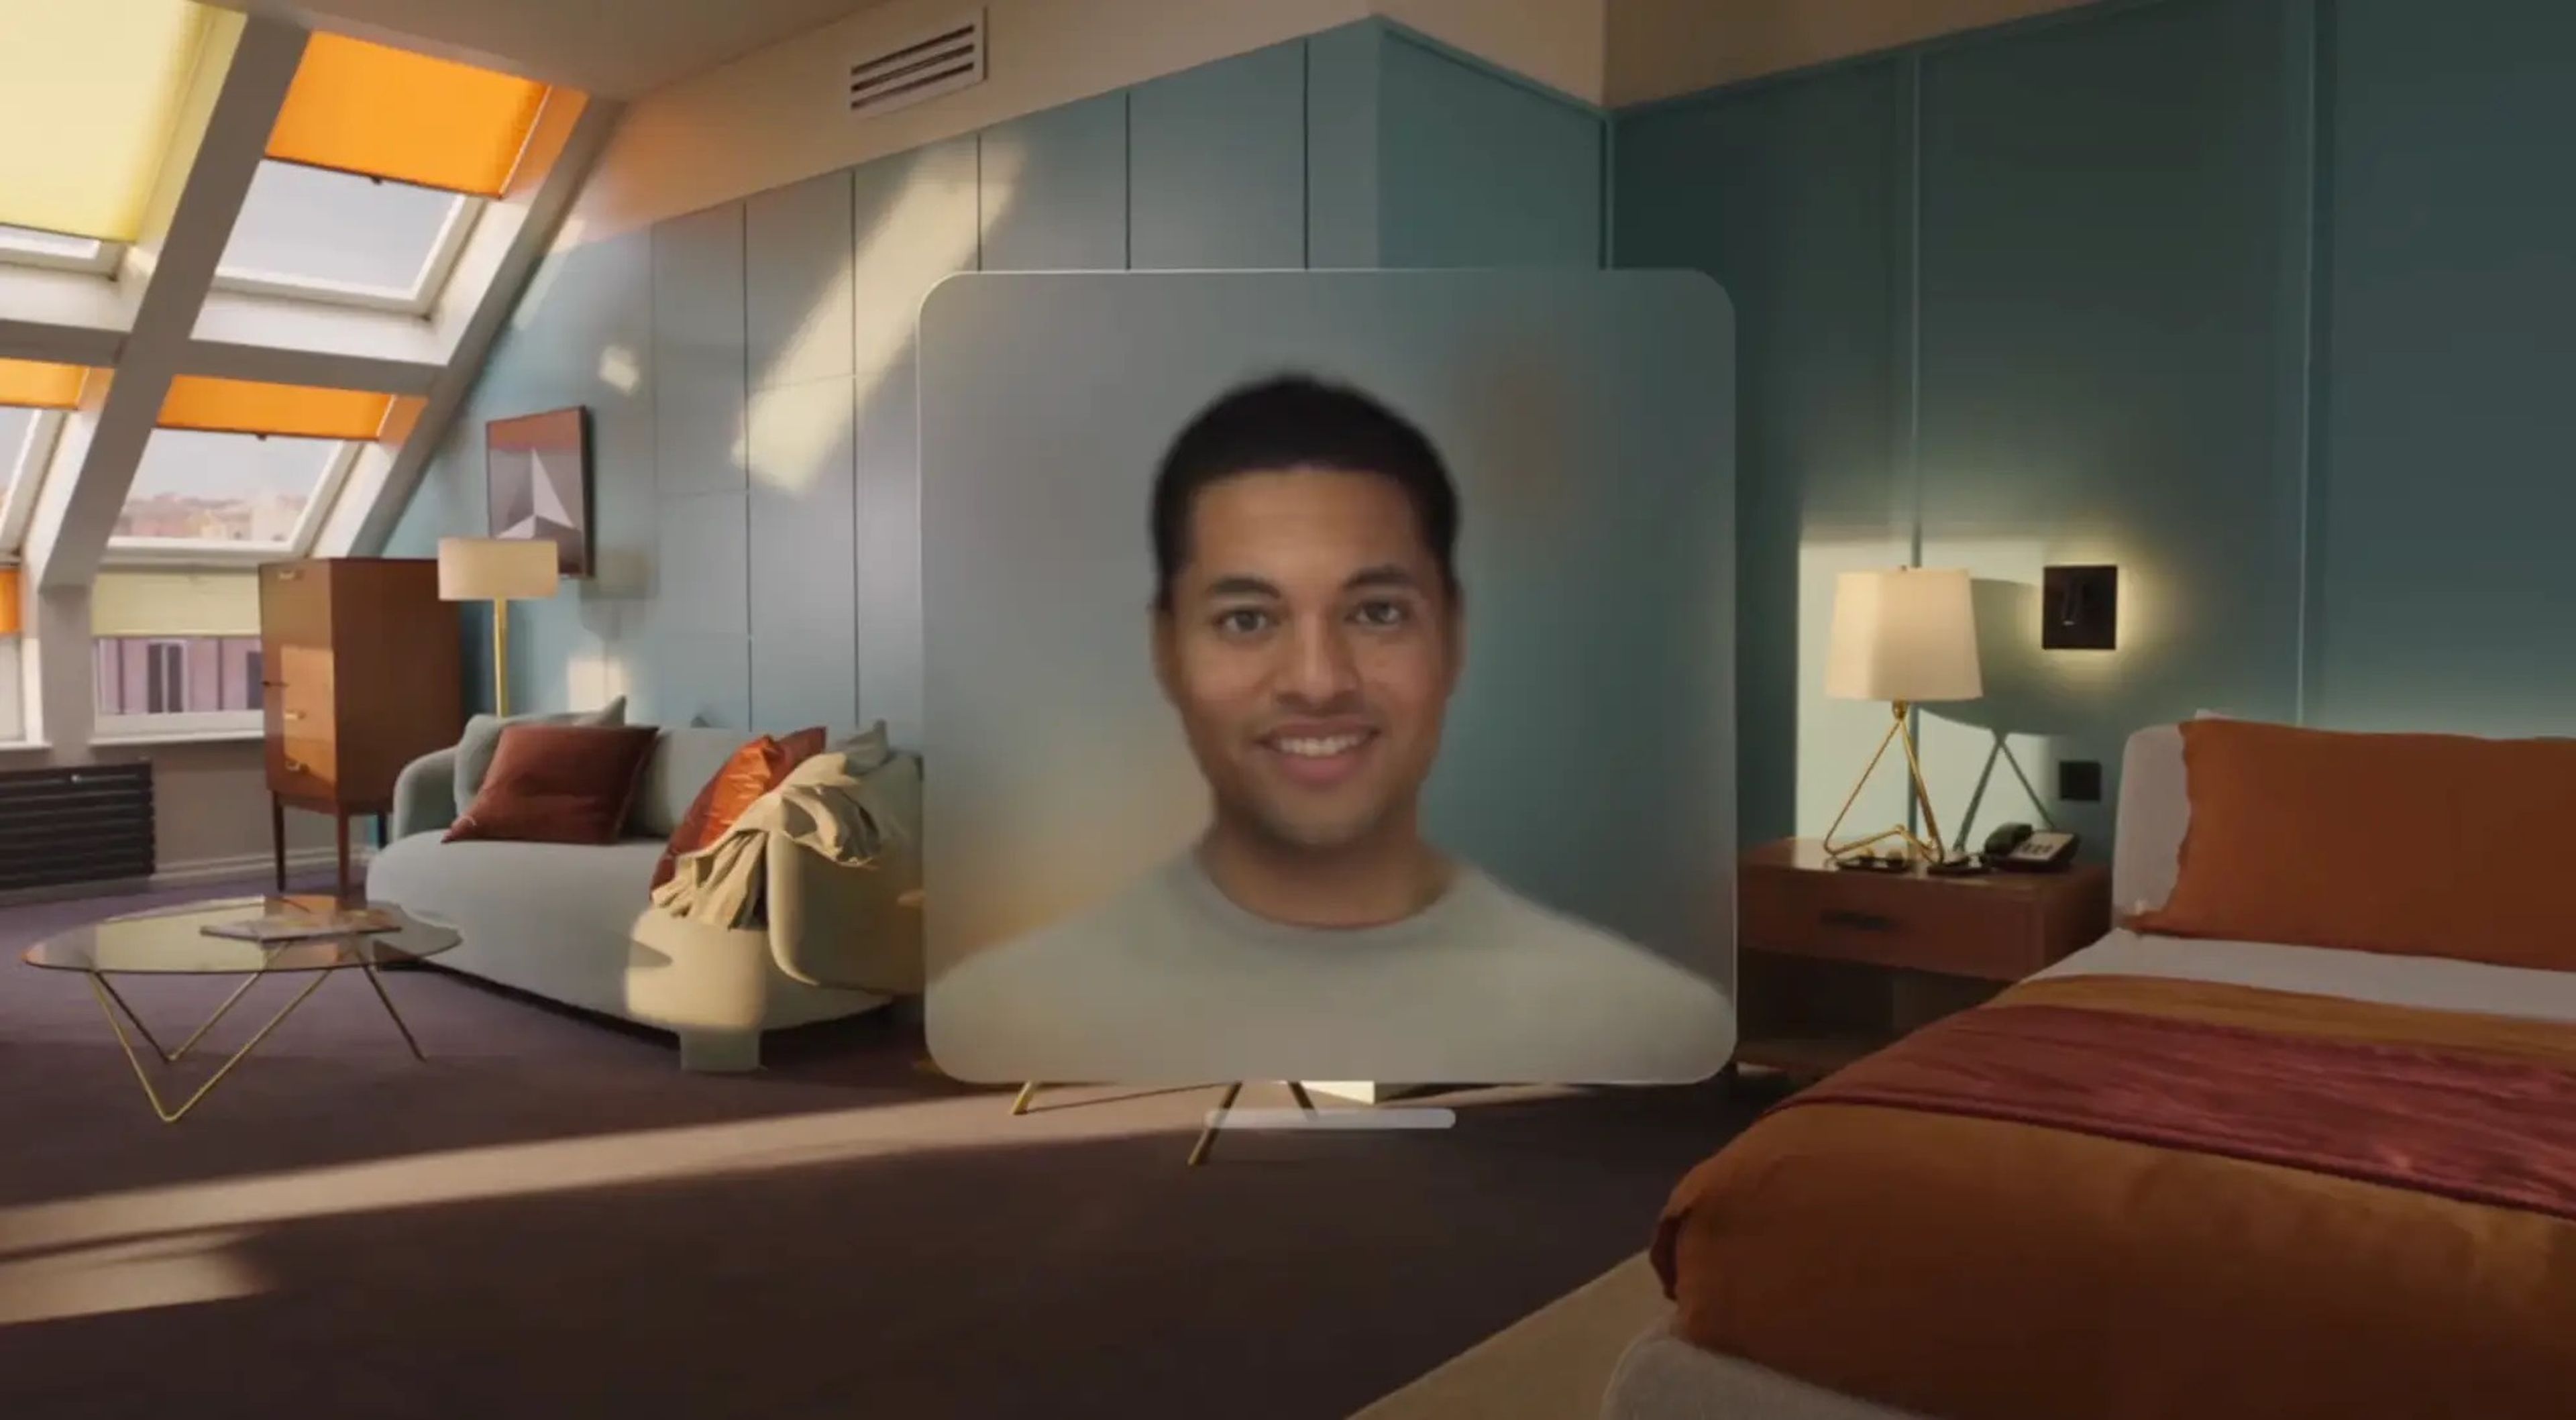 Apple's Vision Pro creates a digital version of users for use in FaceTime.